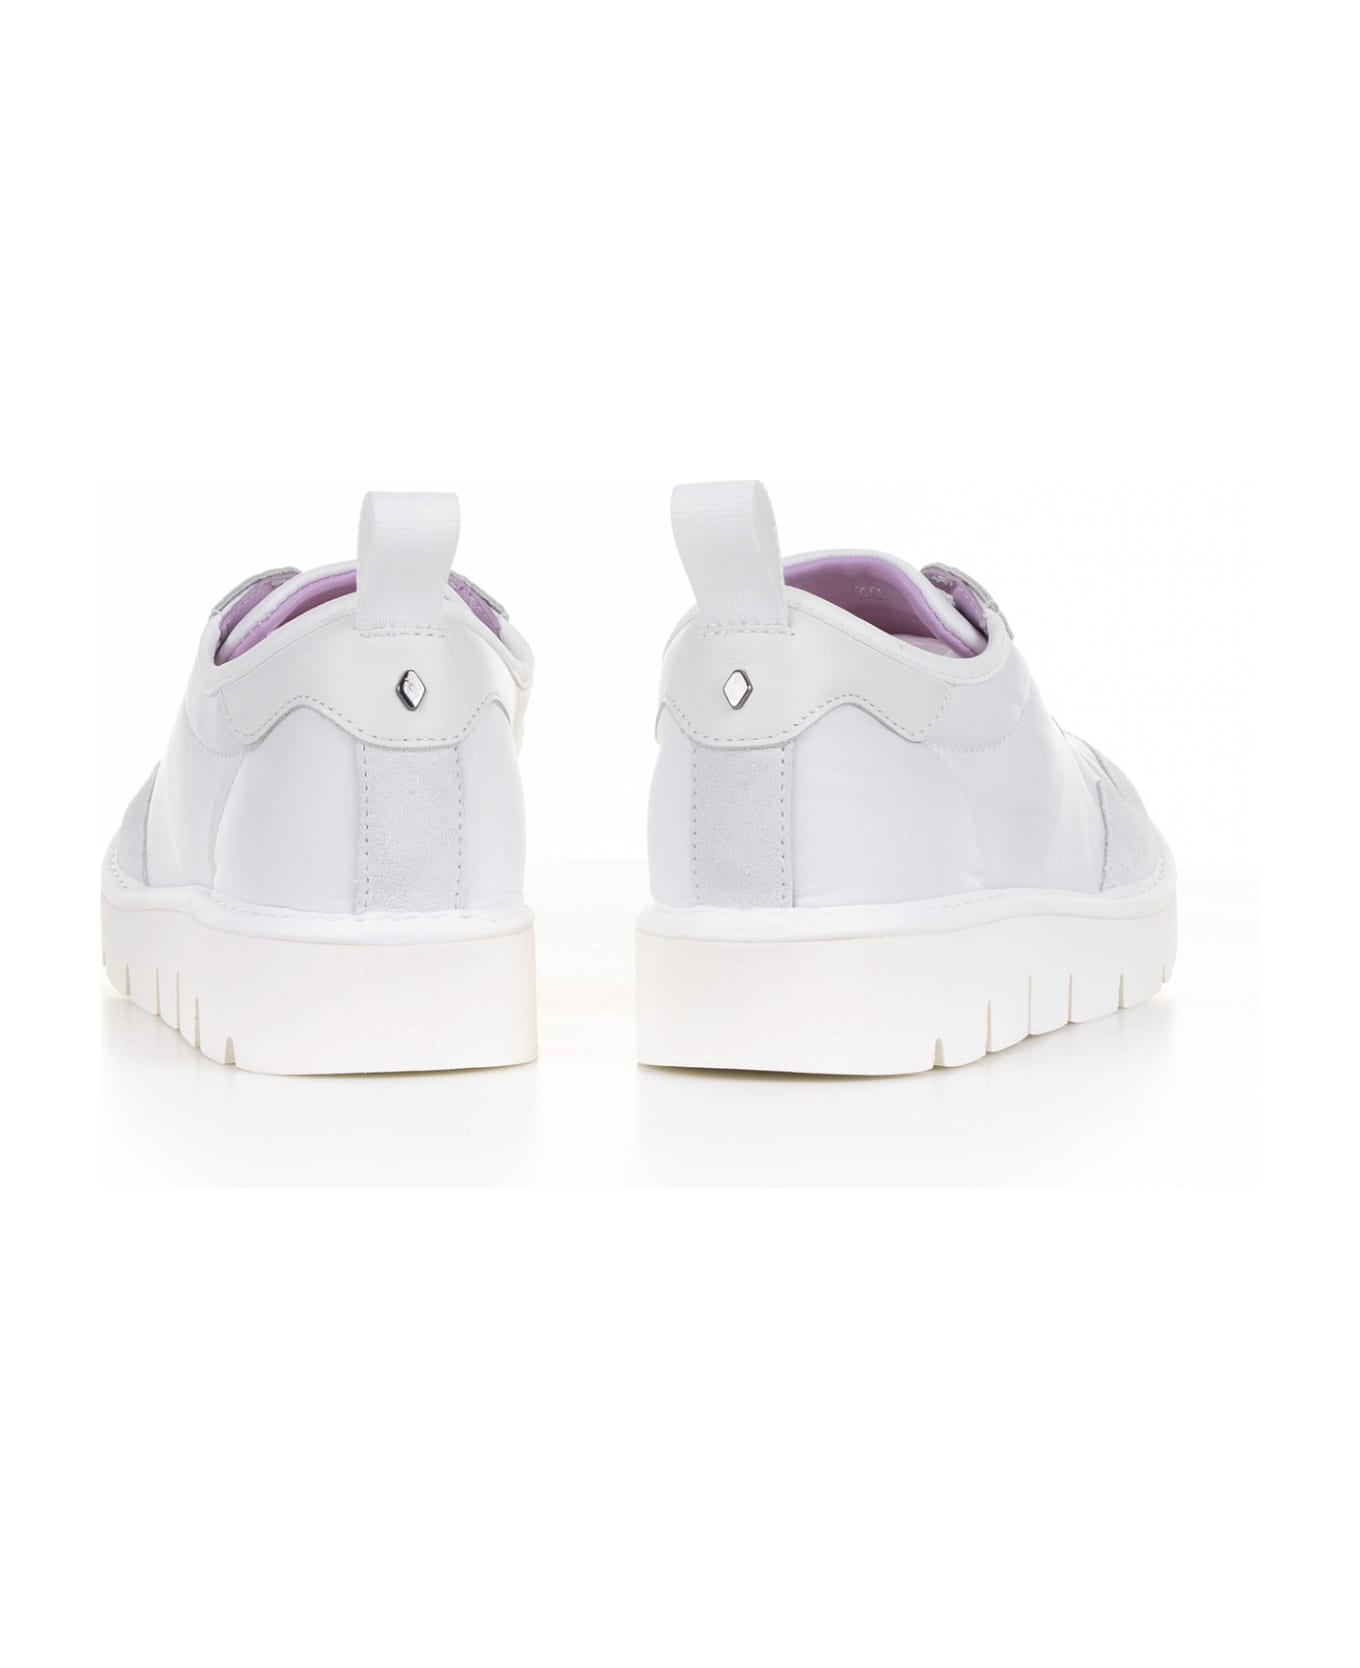 Panchic Slip On Sneakers In Nylon And Suede - WHITE スニーカー